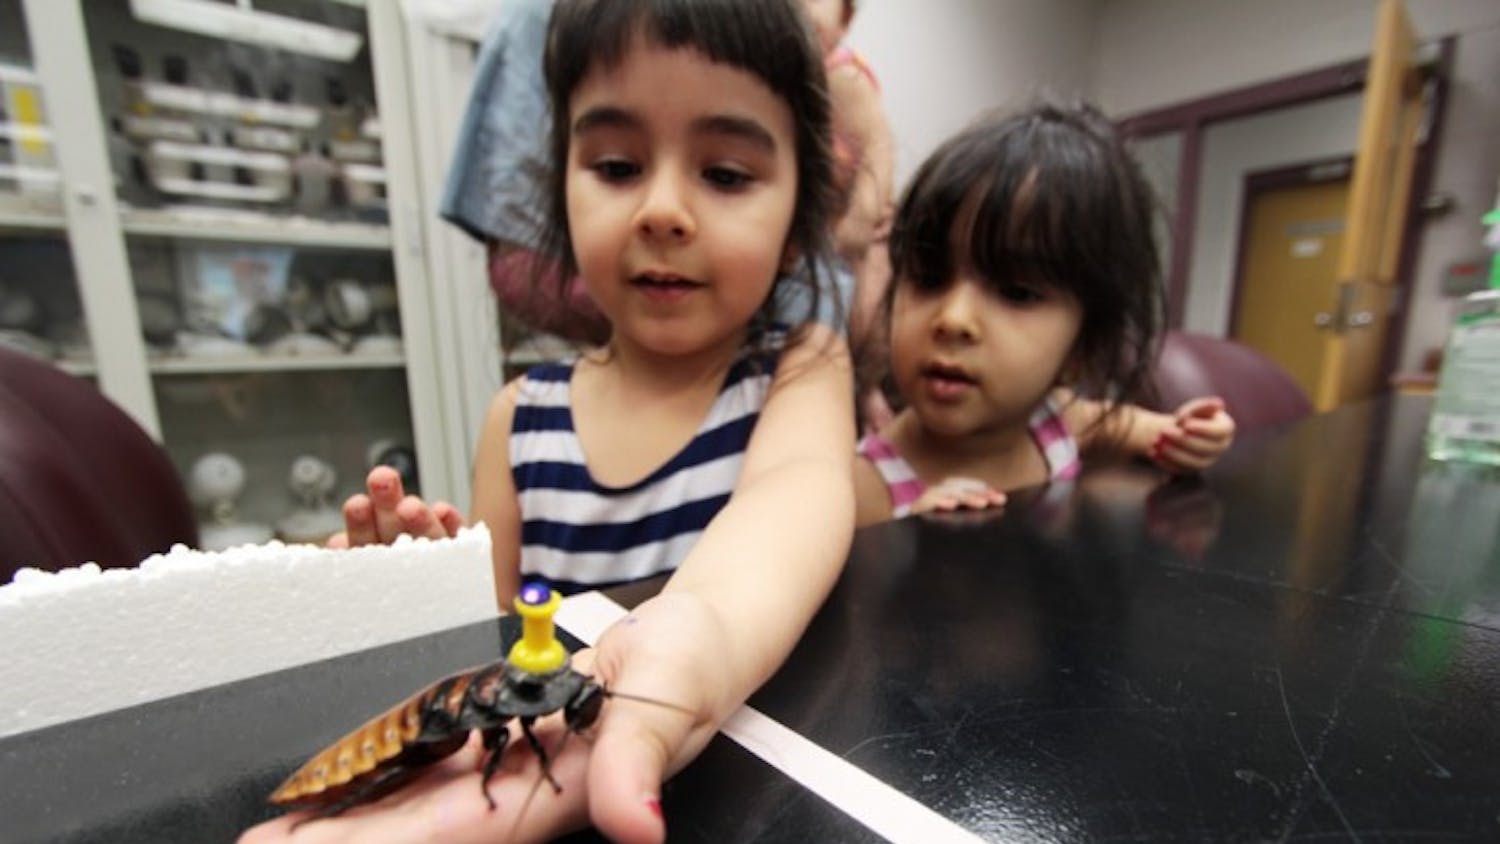 Reema Alnuaimat, 4, holds Noah, a Madagascar hissing cockroach, as her sister, Salma, 3, looks on. The cockroaches were pulling toy tractors at BugFest Open House, an event put on by the entomology and nematology department, on Wednesday evening.